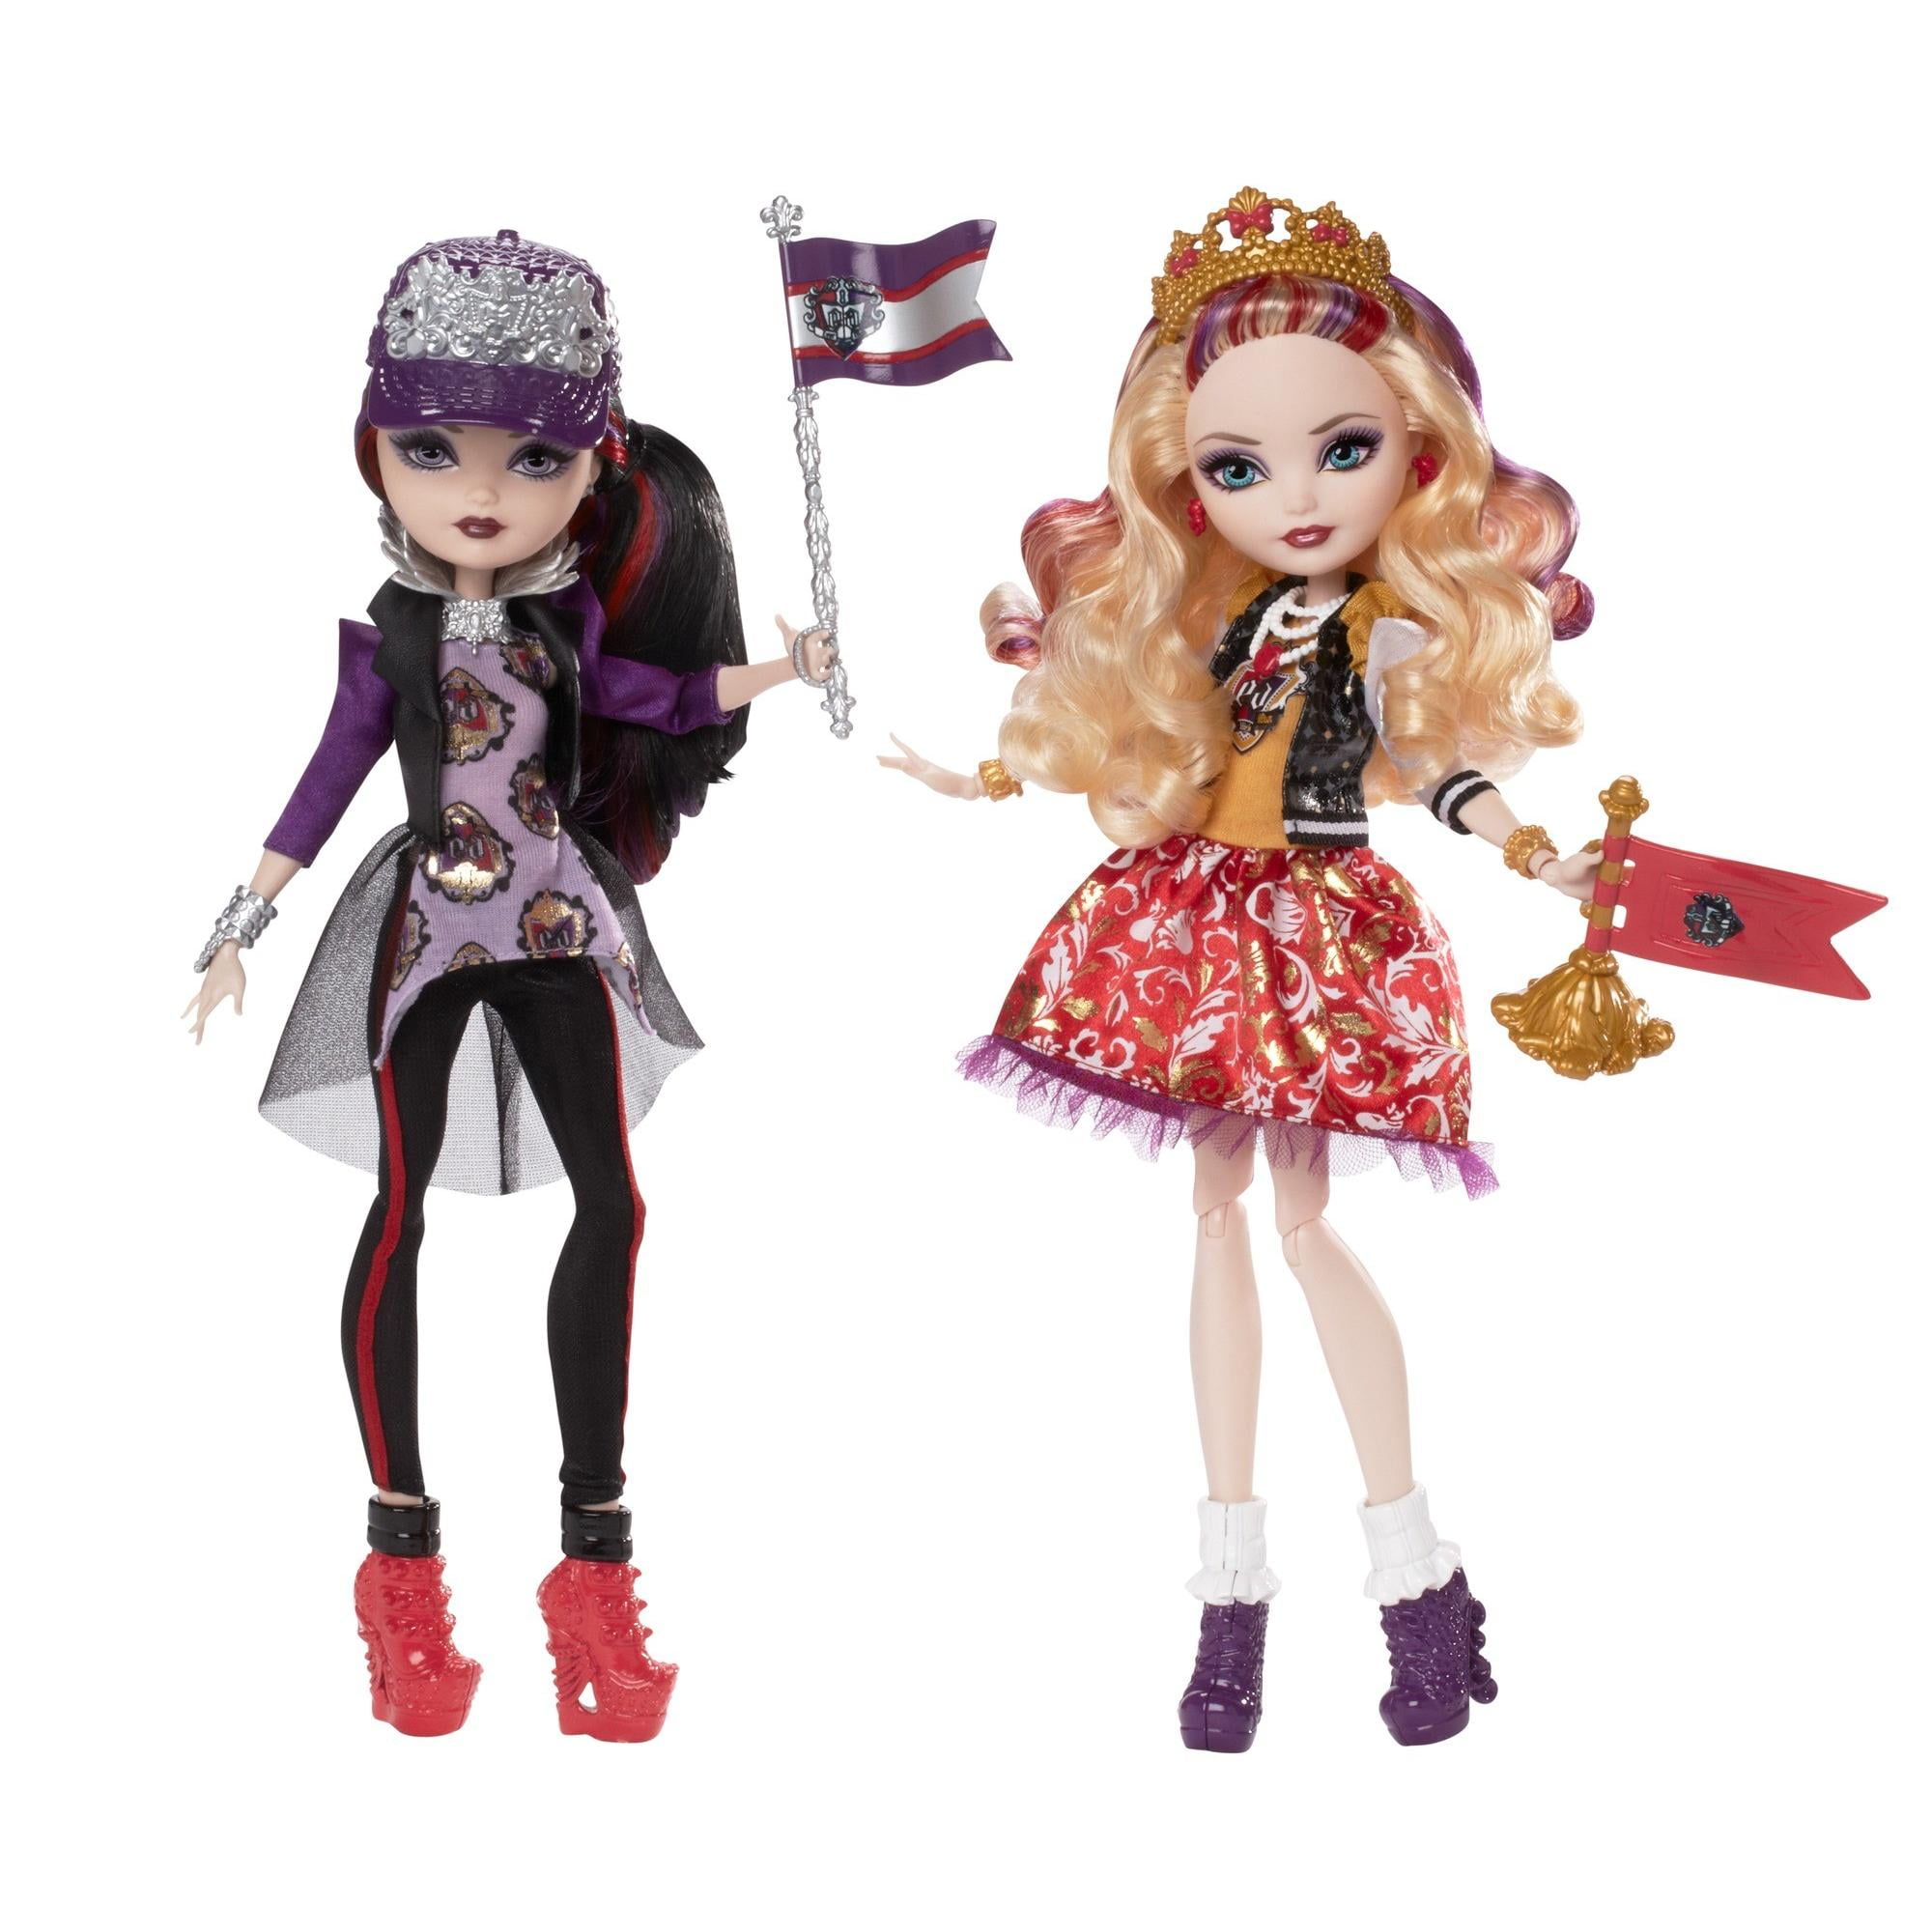 Original Ever After High Doll Action Figure Collection Toys Raven